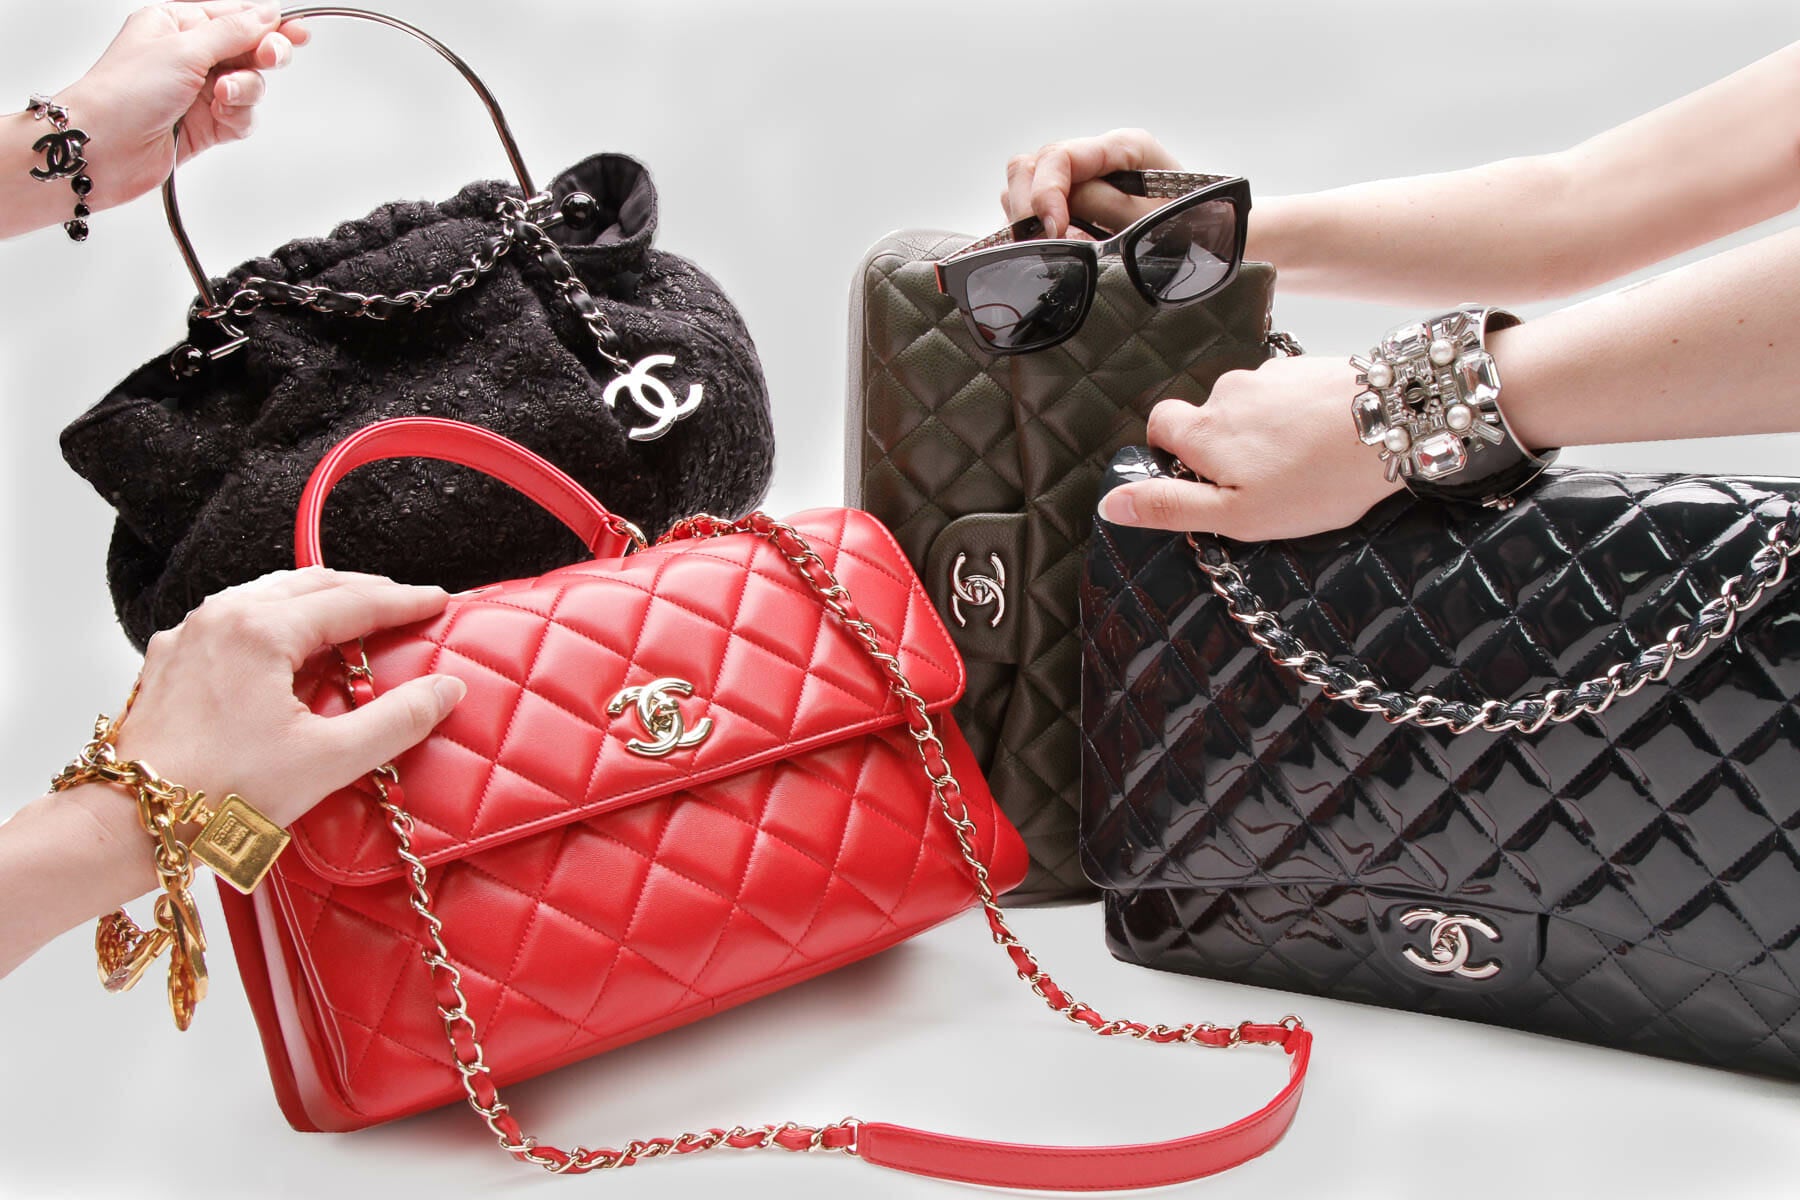 A Quick Guide To Popular Chanel Materials - Couture USA